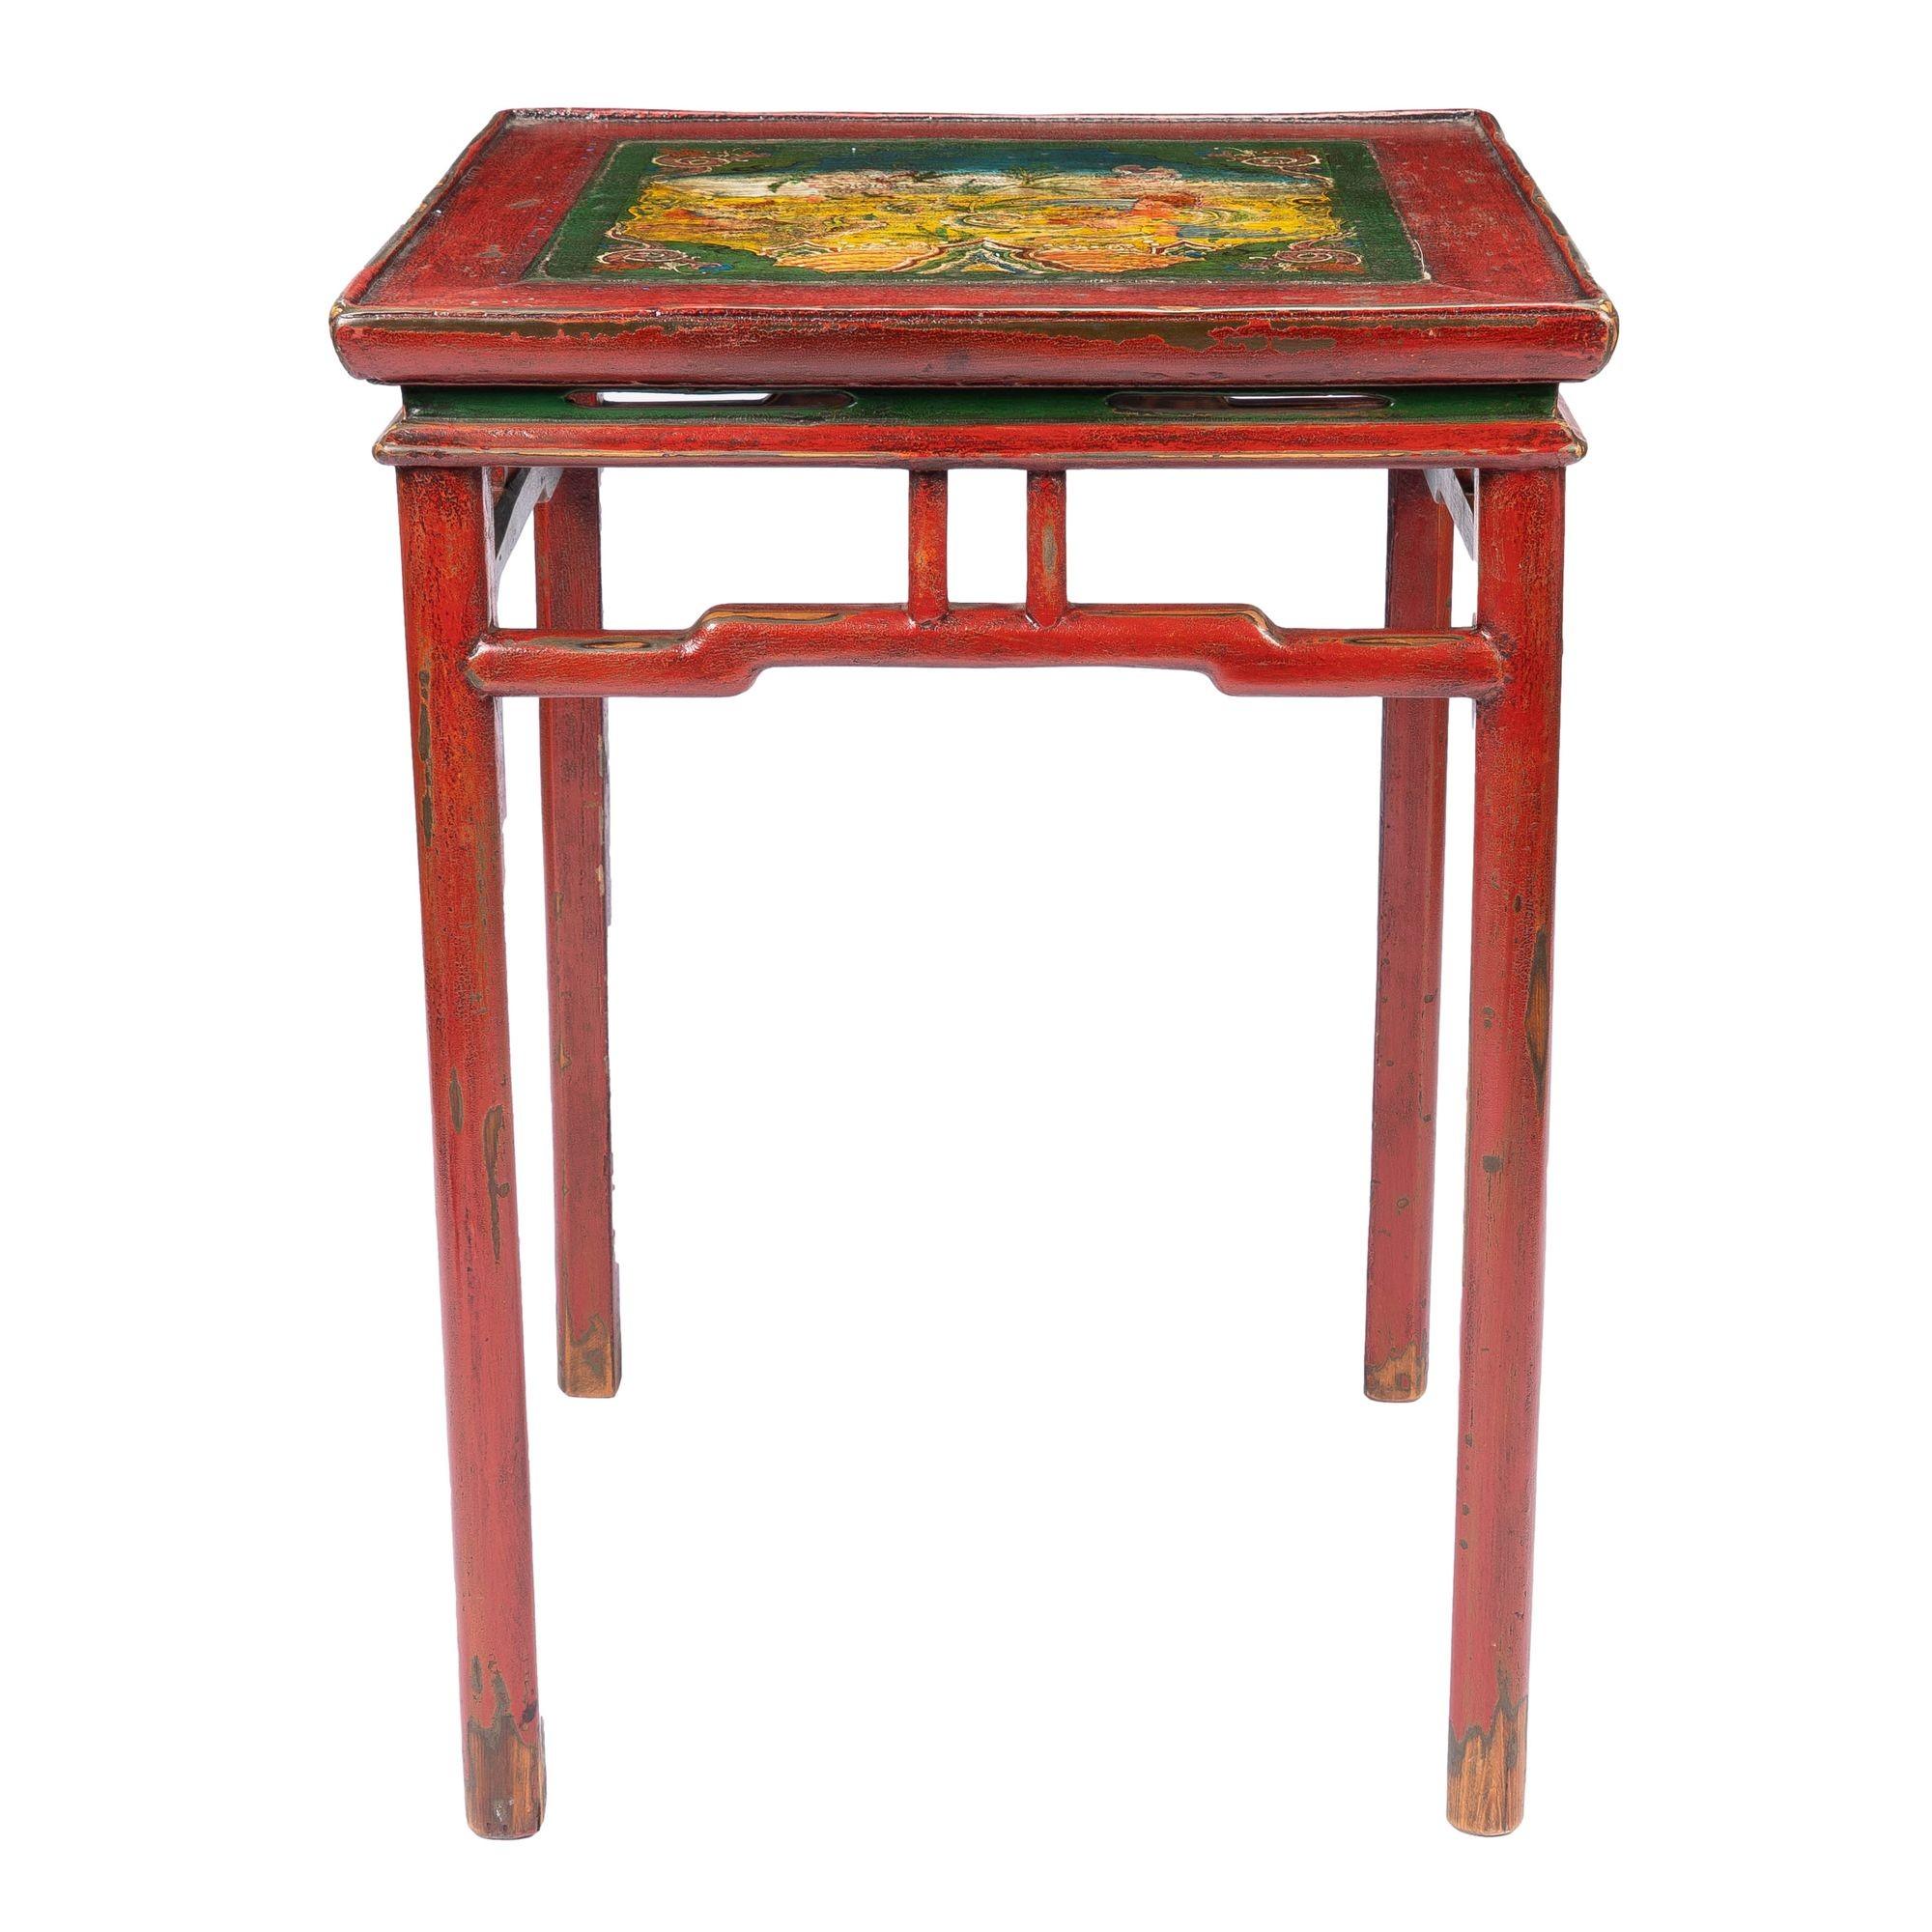 Tibetan red lacquered hard wood table with hump-back apron rails joining four turned legs. The painted table top features a fantastical landscape in polychrome enamels within a painted border.
Tibet, circa 1910.